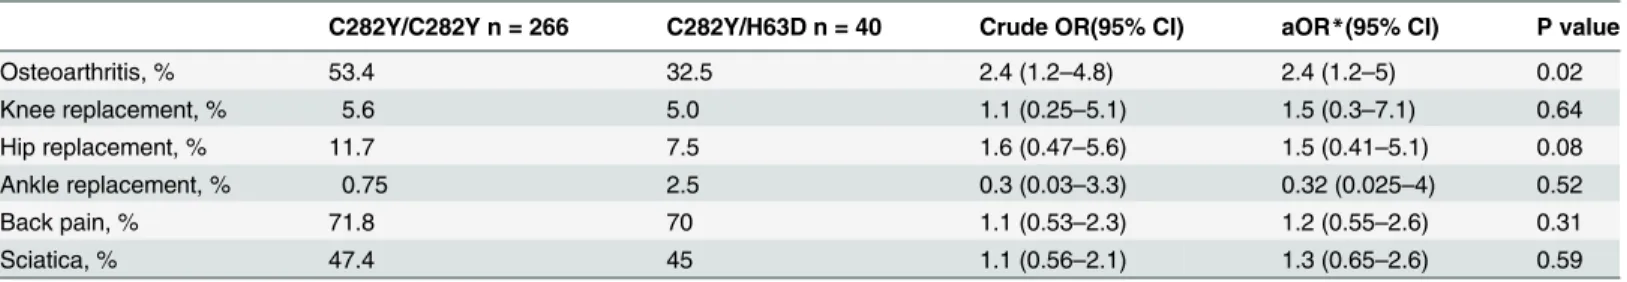 Table 3. Prevalence of osteoarthritis, joint replacement, back pain and sciatica by genotype.